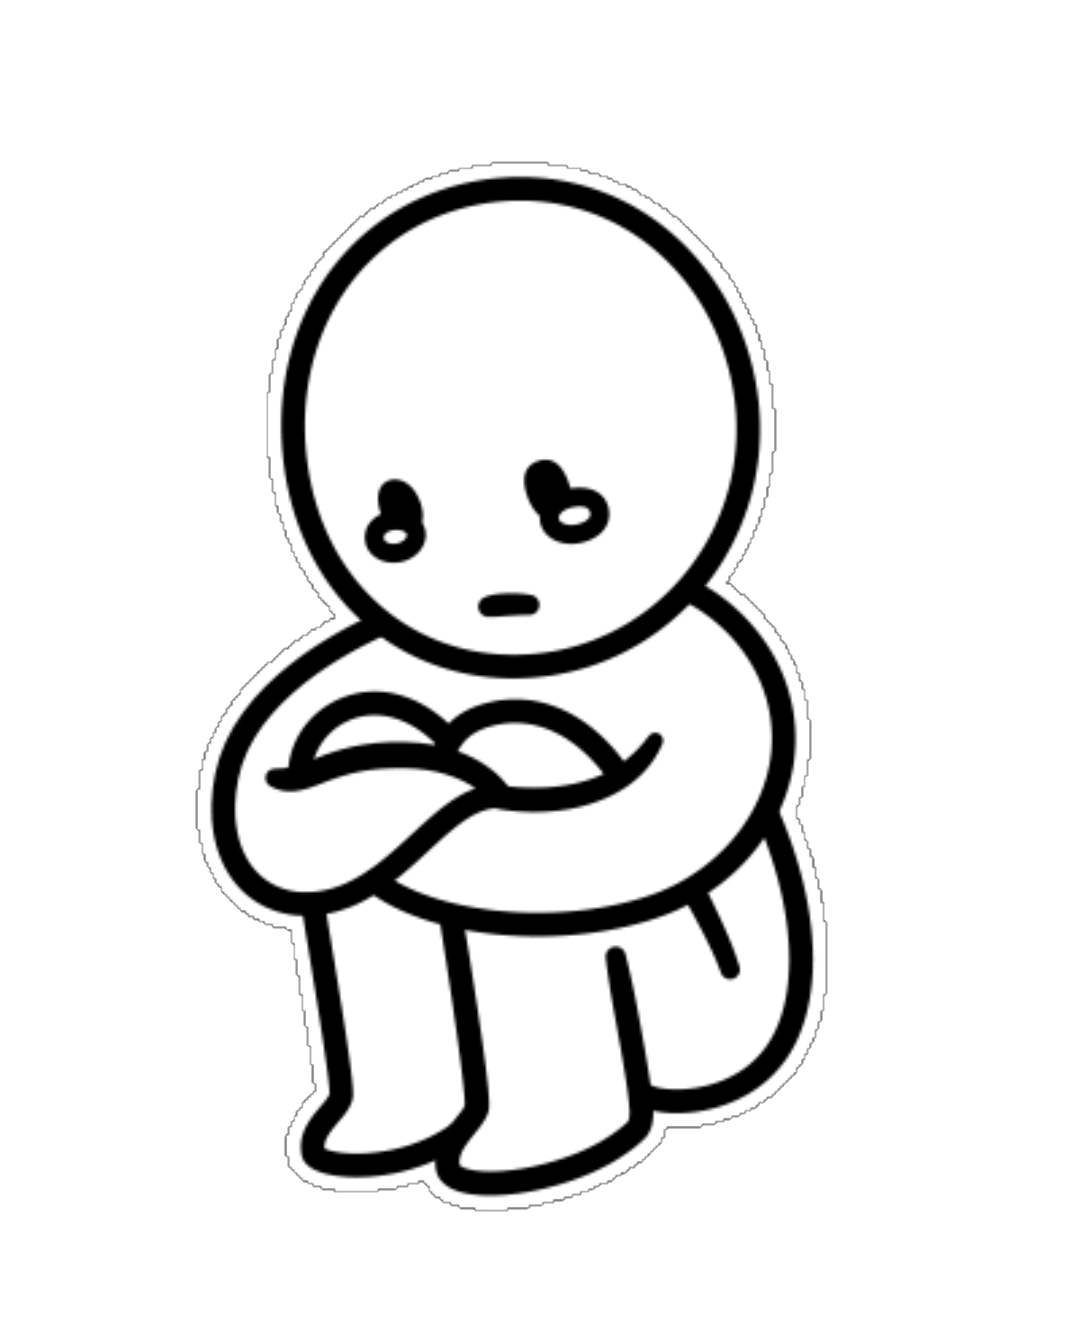 Sad Drawings PNG Background | PNG Play